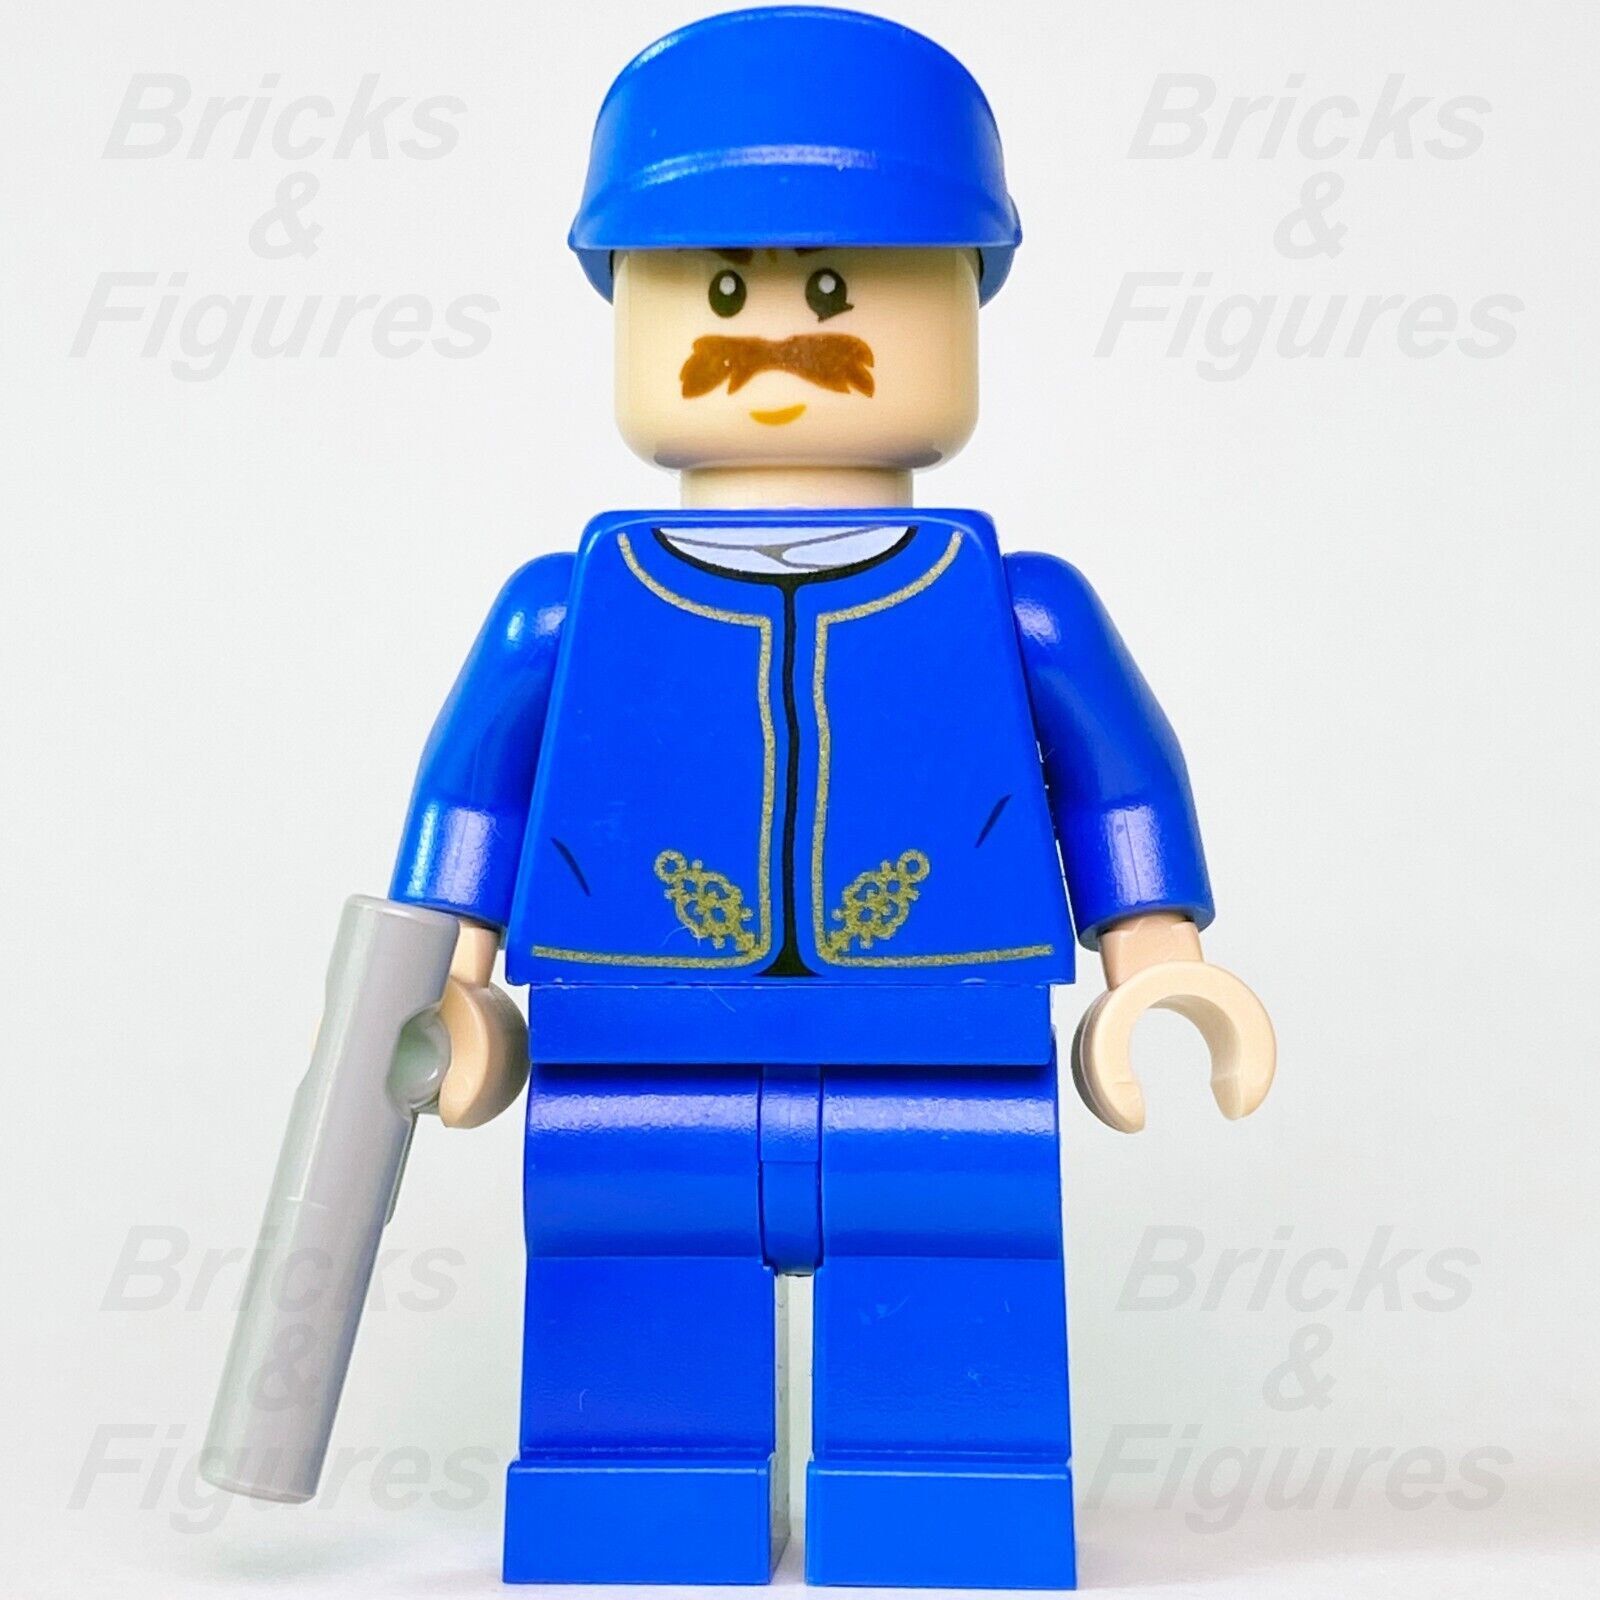 LEGO Star Wars Bespin Guard Minifigure with Moustache Episode 5 75222 sw0975